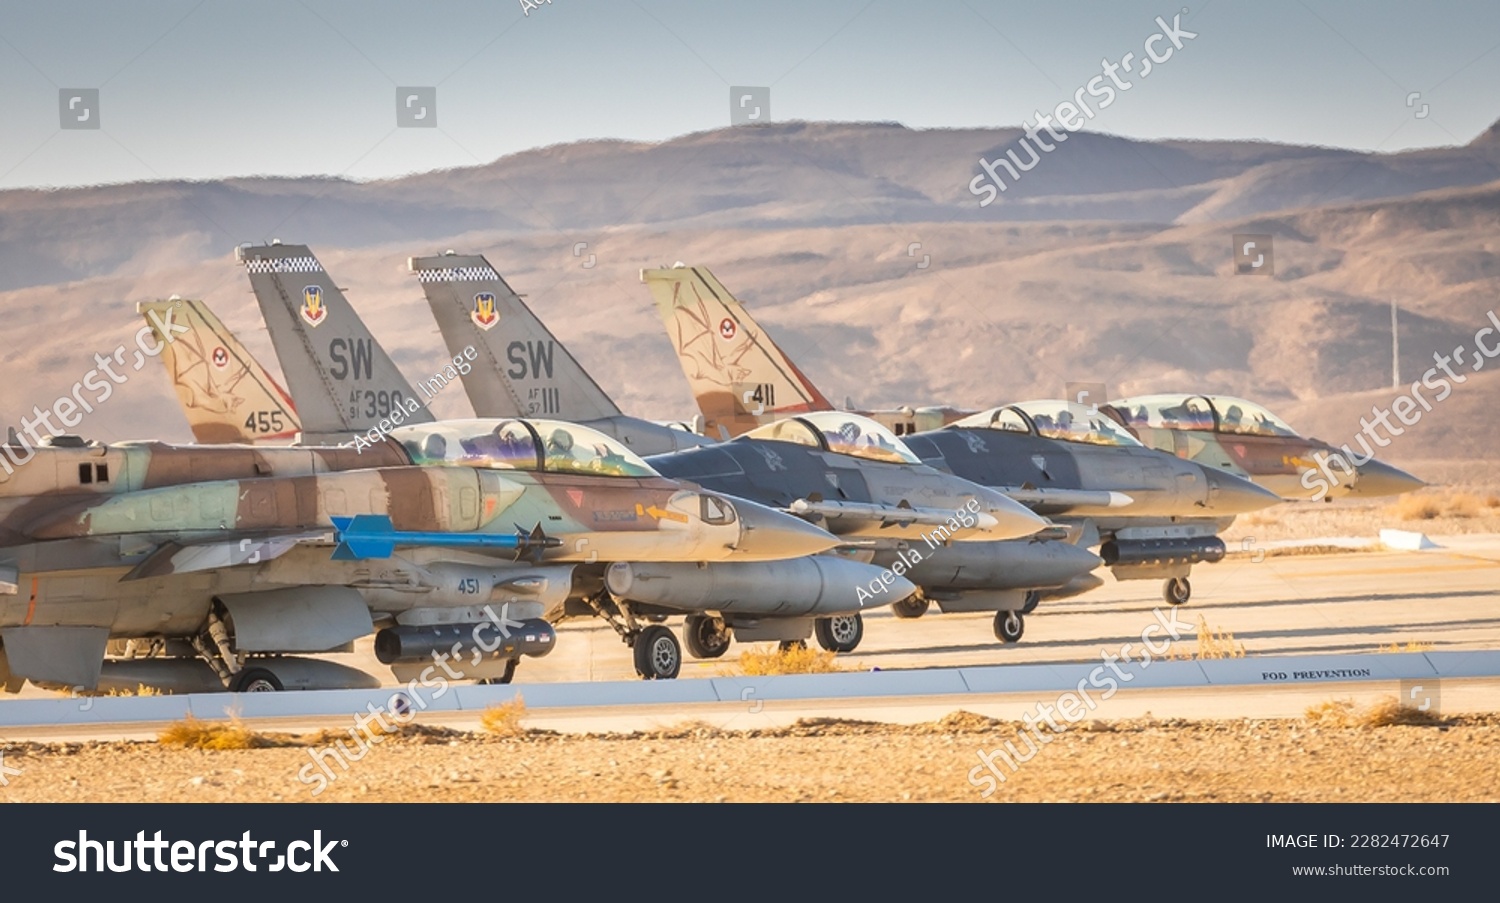 U.S. Air Force pilots from the 55th Expeditionary Fighter Squadron taxi alongside the Israeli Air Force during Desert Falcon in Israel, Jan. 16, 2022.  #2282472647